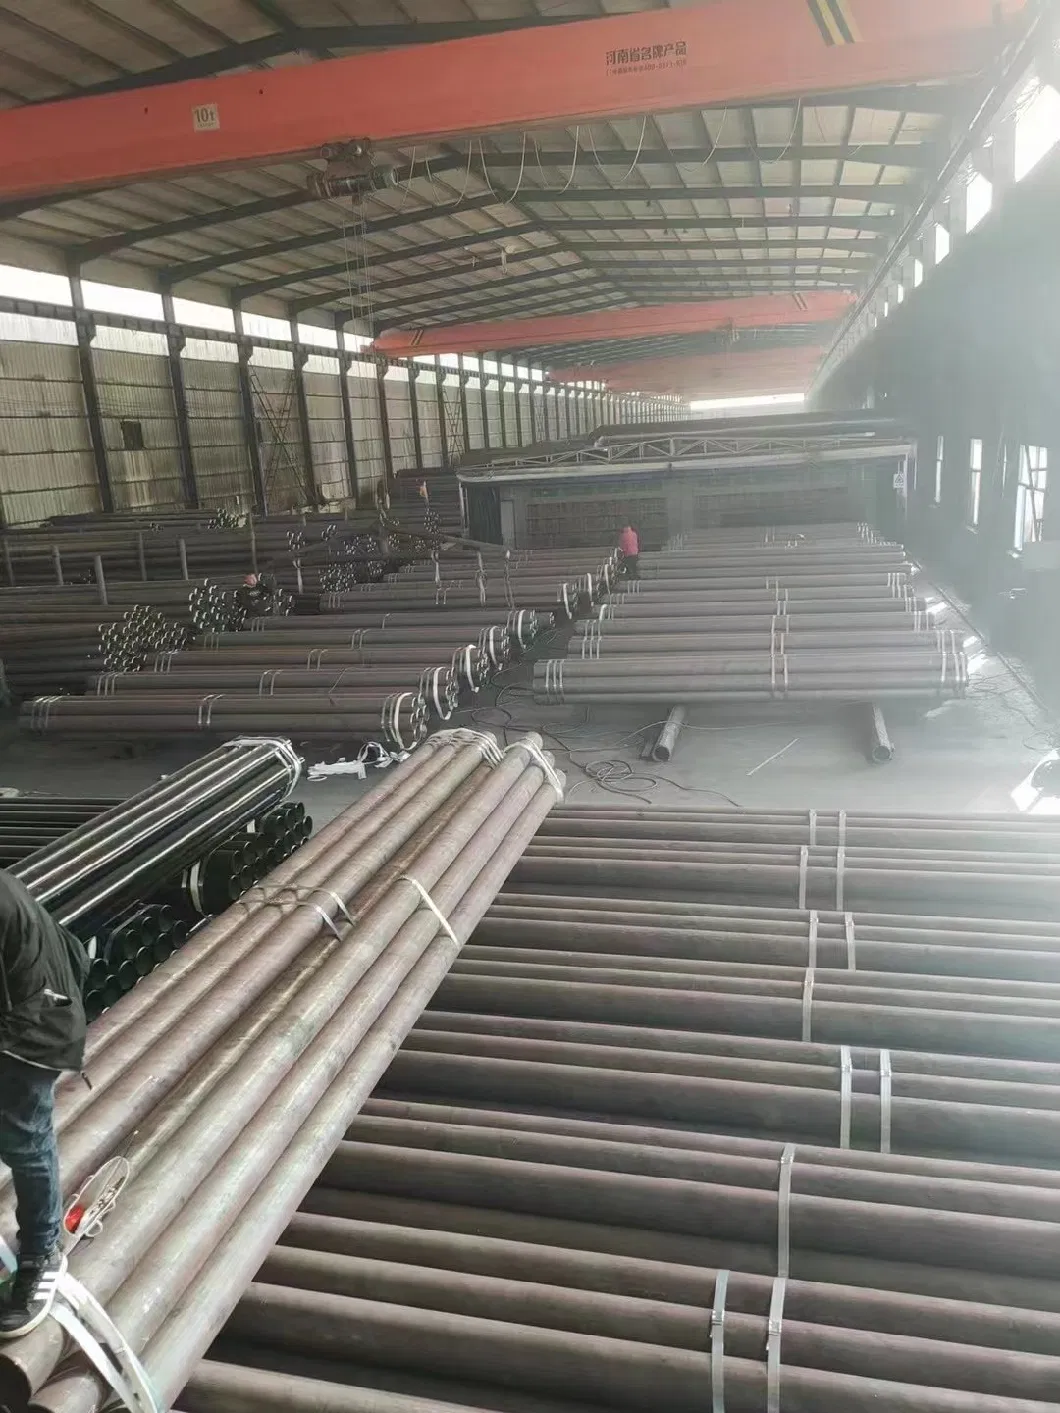 ASTM A106 / API 5L / ASTM A53 Grade B Seamless Steel Pipe Manufacturers for Oil and Gas